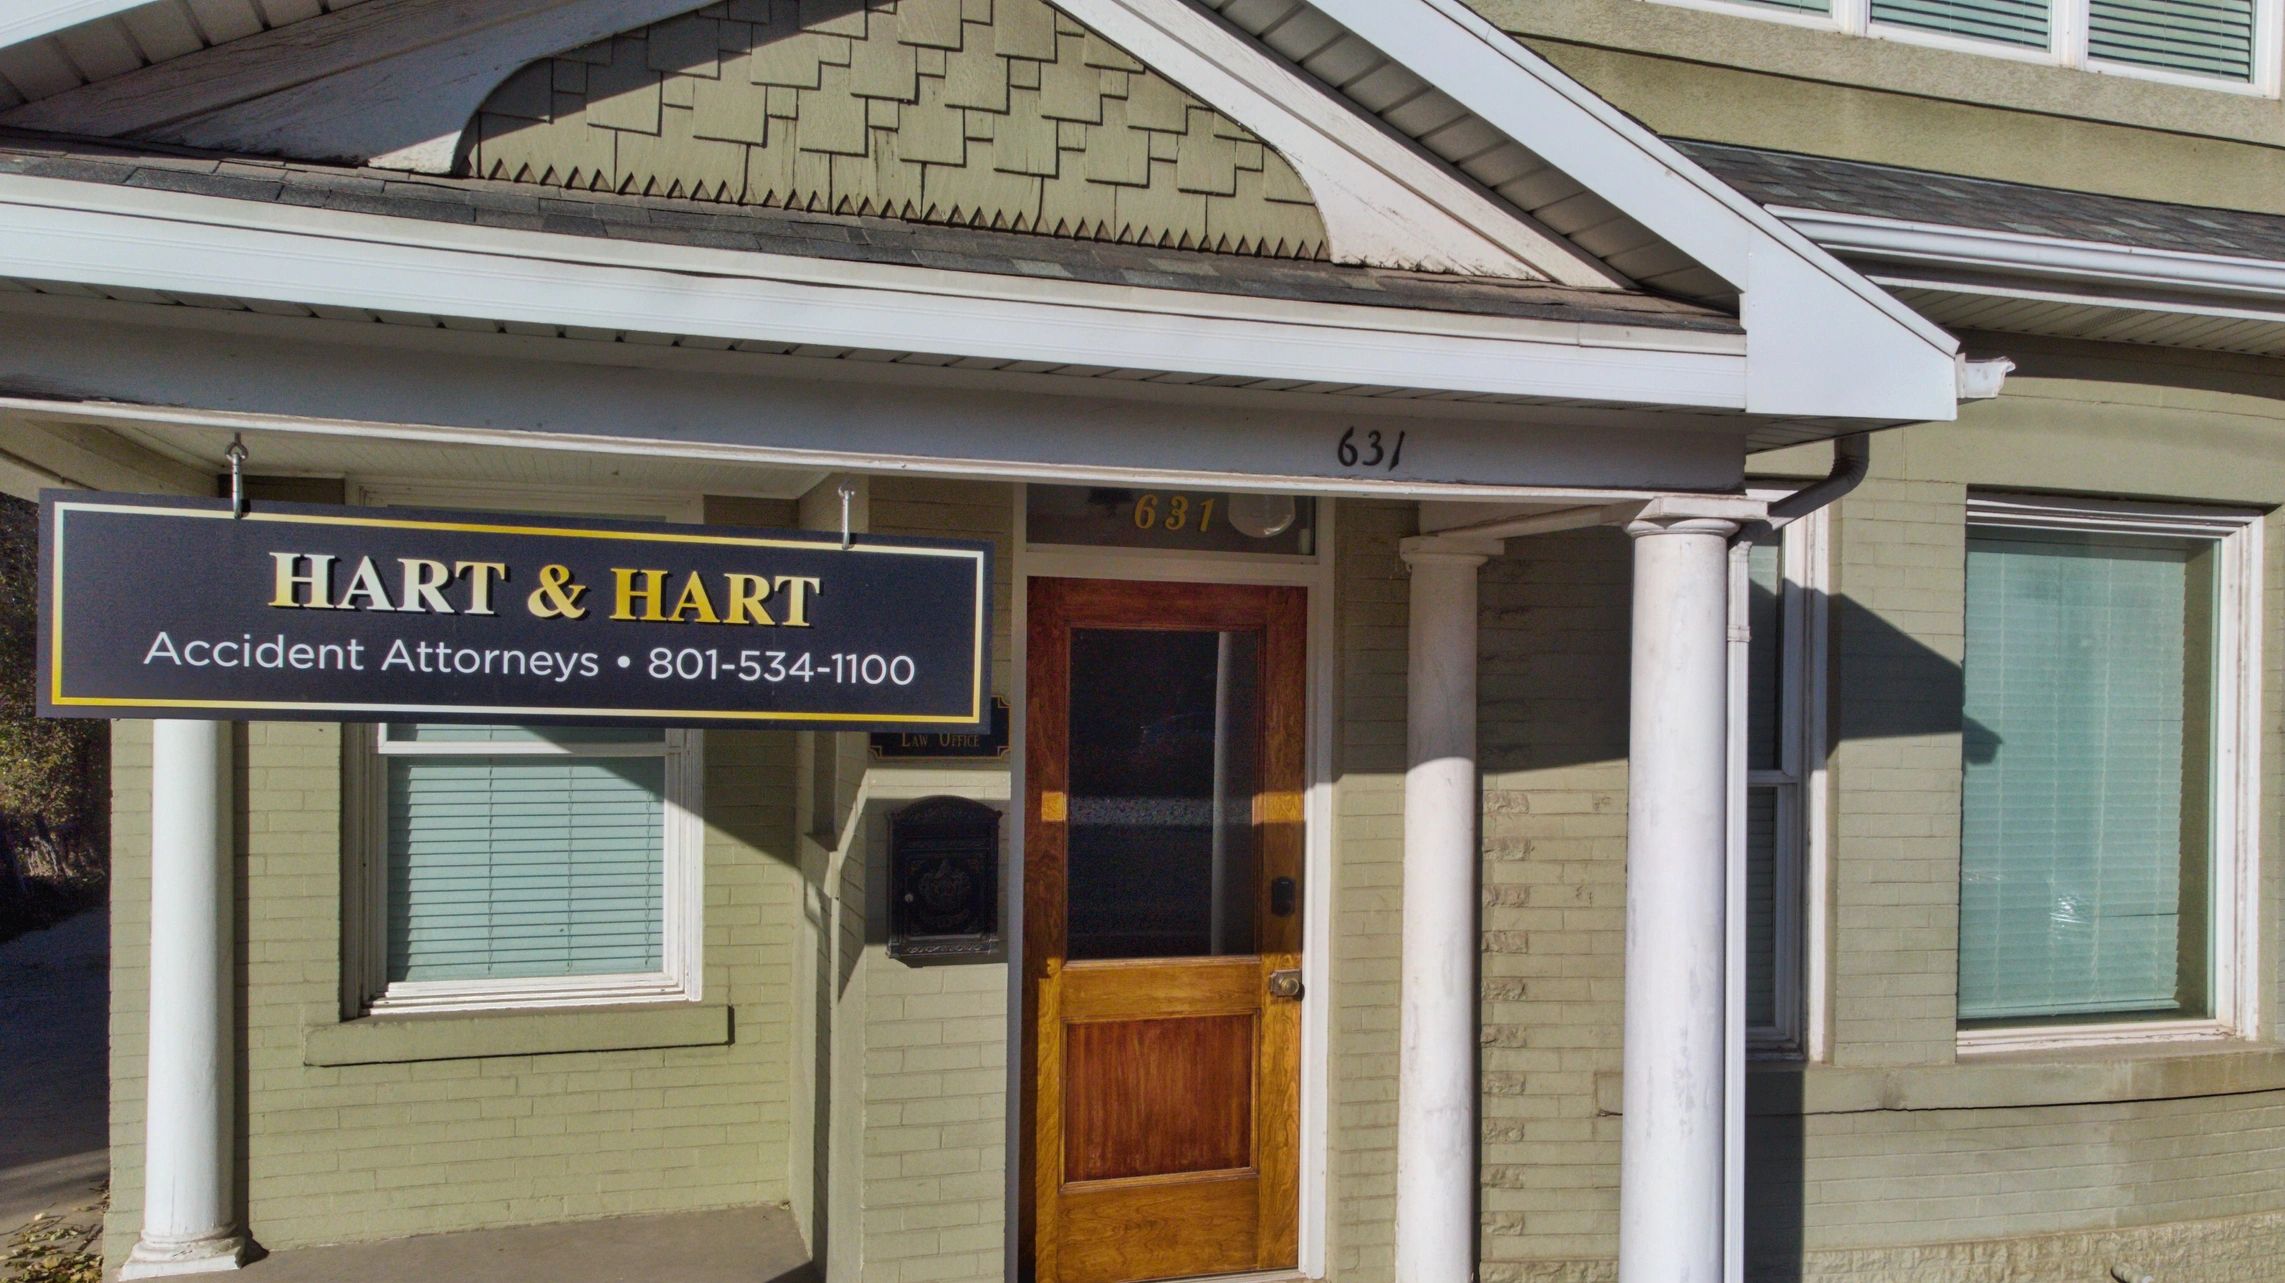 Hart & Hart office building personal injury accident attorneys